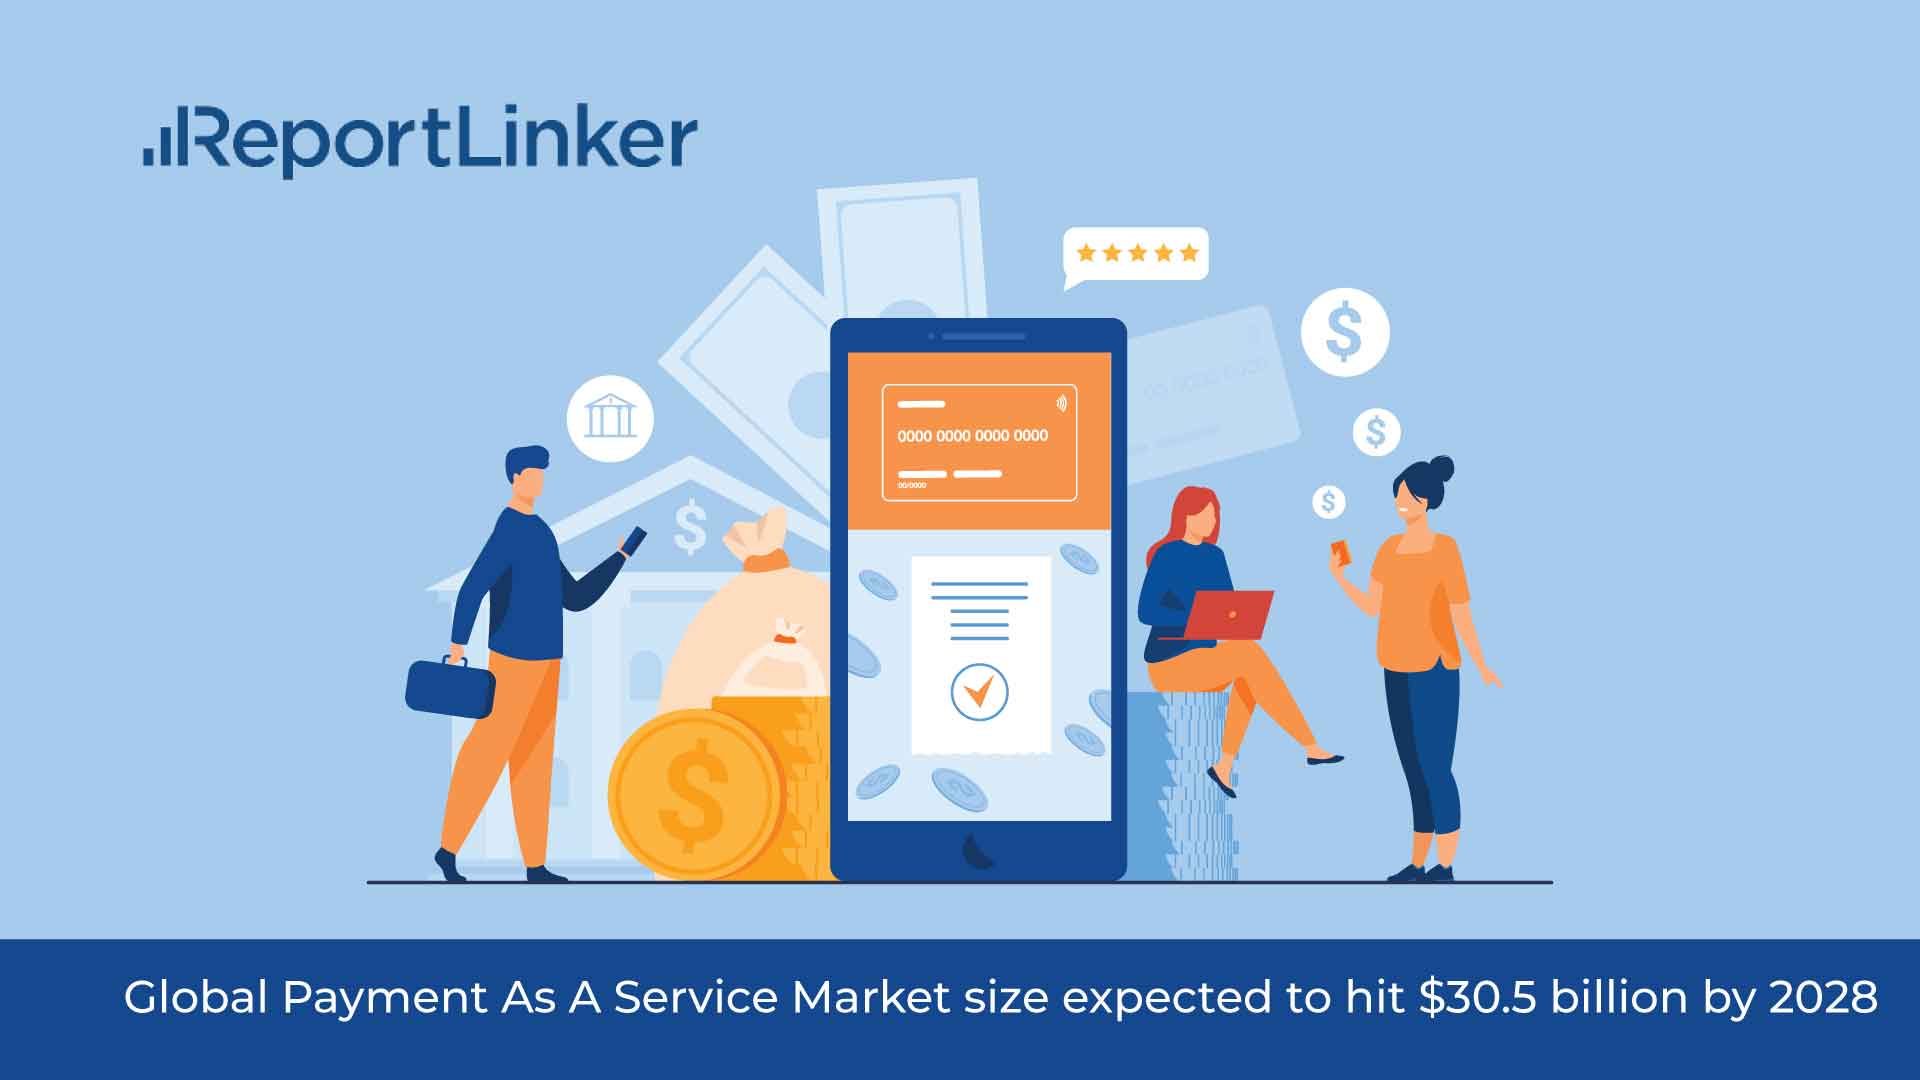 The Global Payment As A Service Market size is expected to reach $30.5 billion by 2028, rising at a market growth of 16.6% CAGR during the forecast period